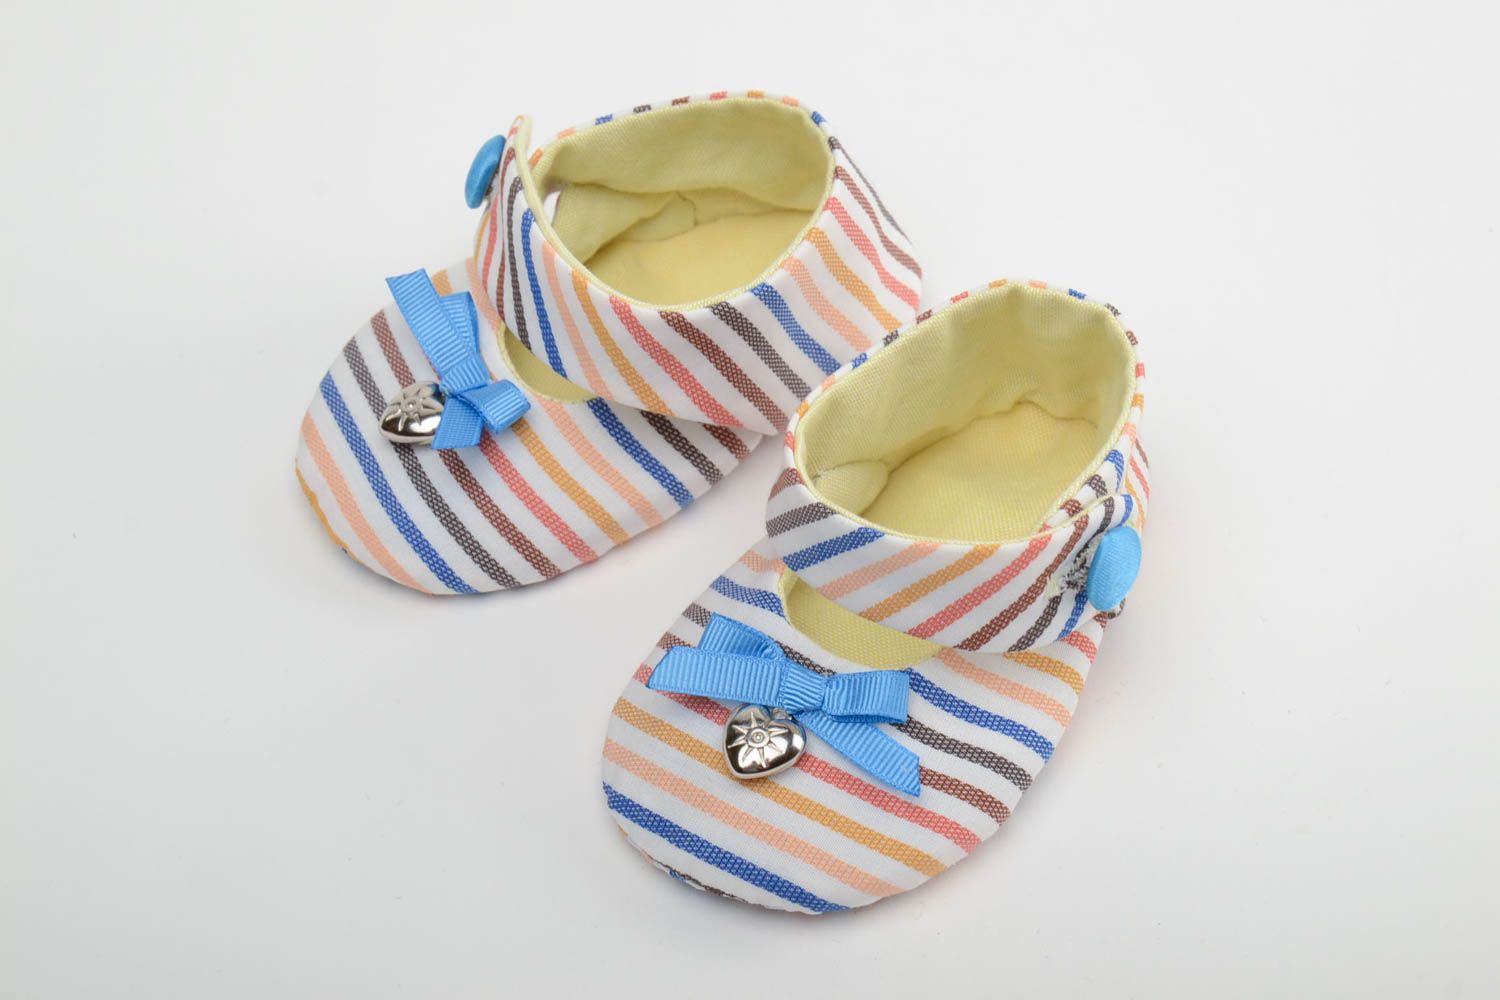 Handmade colorful striped cotton fabric baby shoes with bows for little girl  photo 2